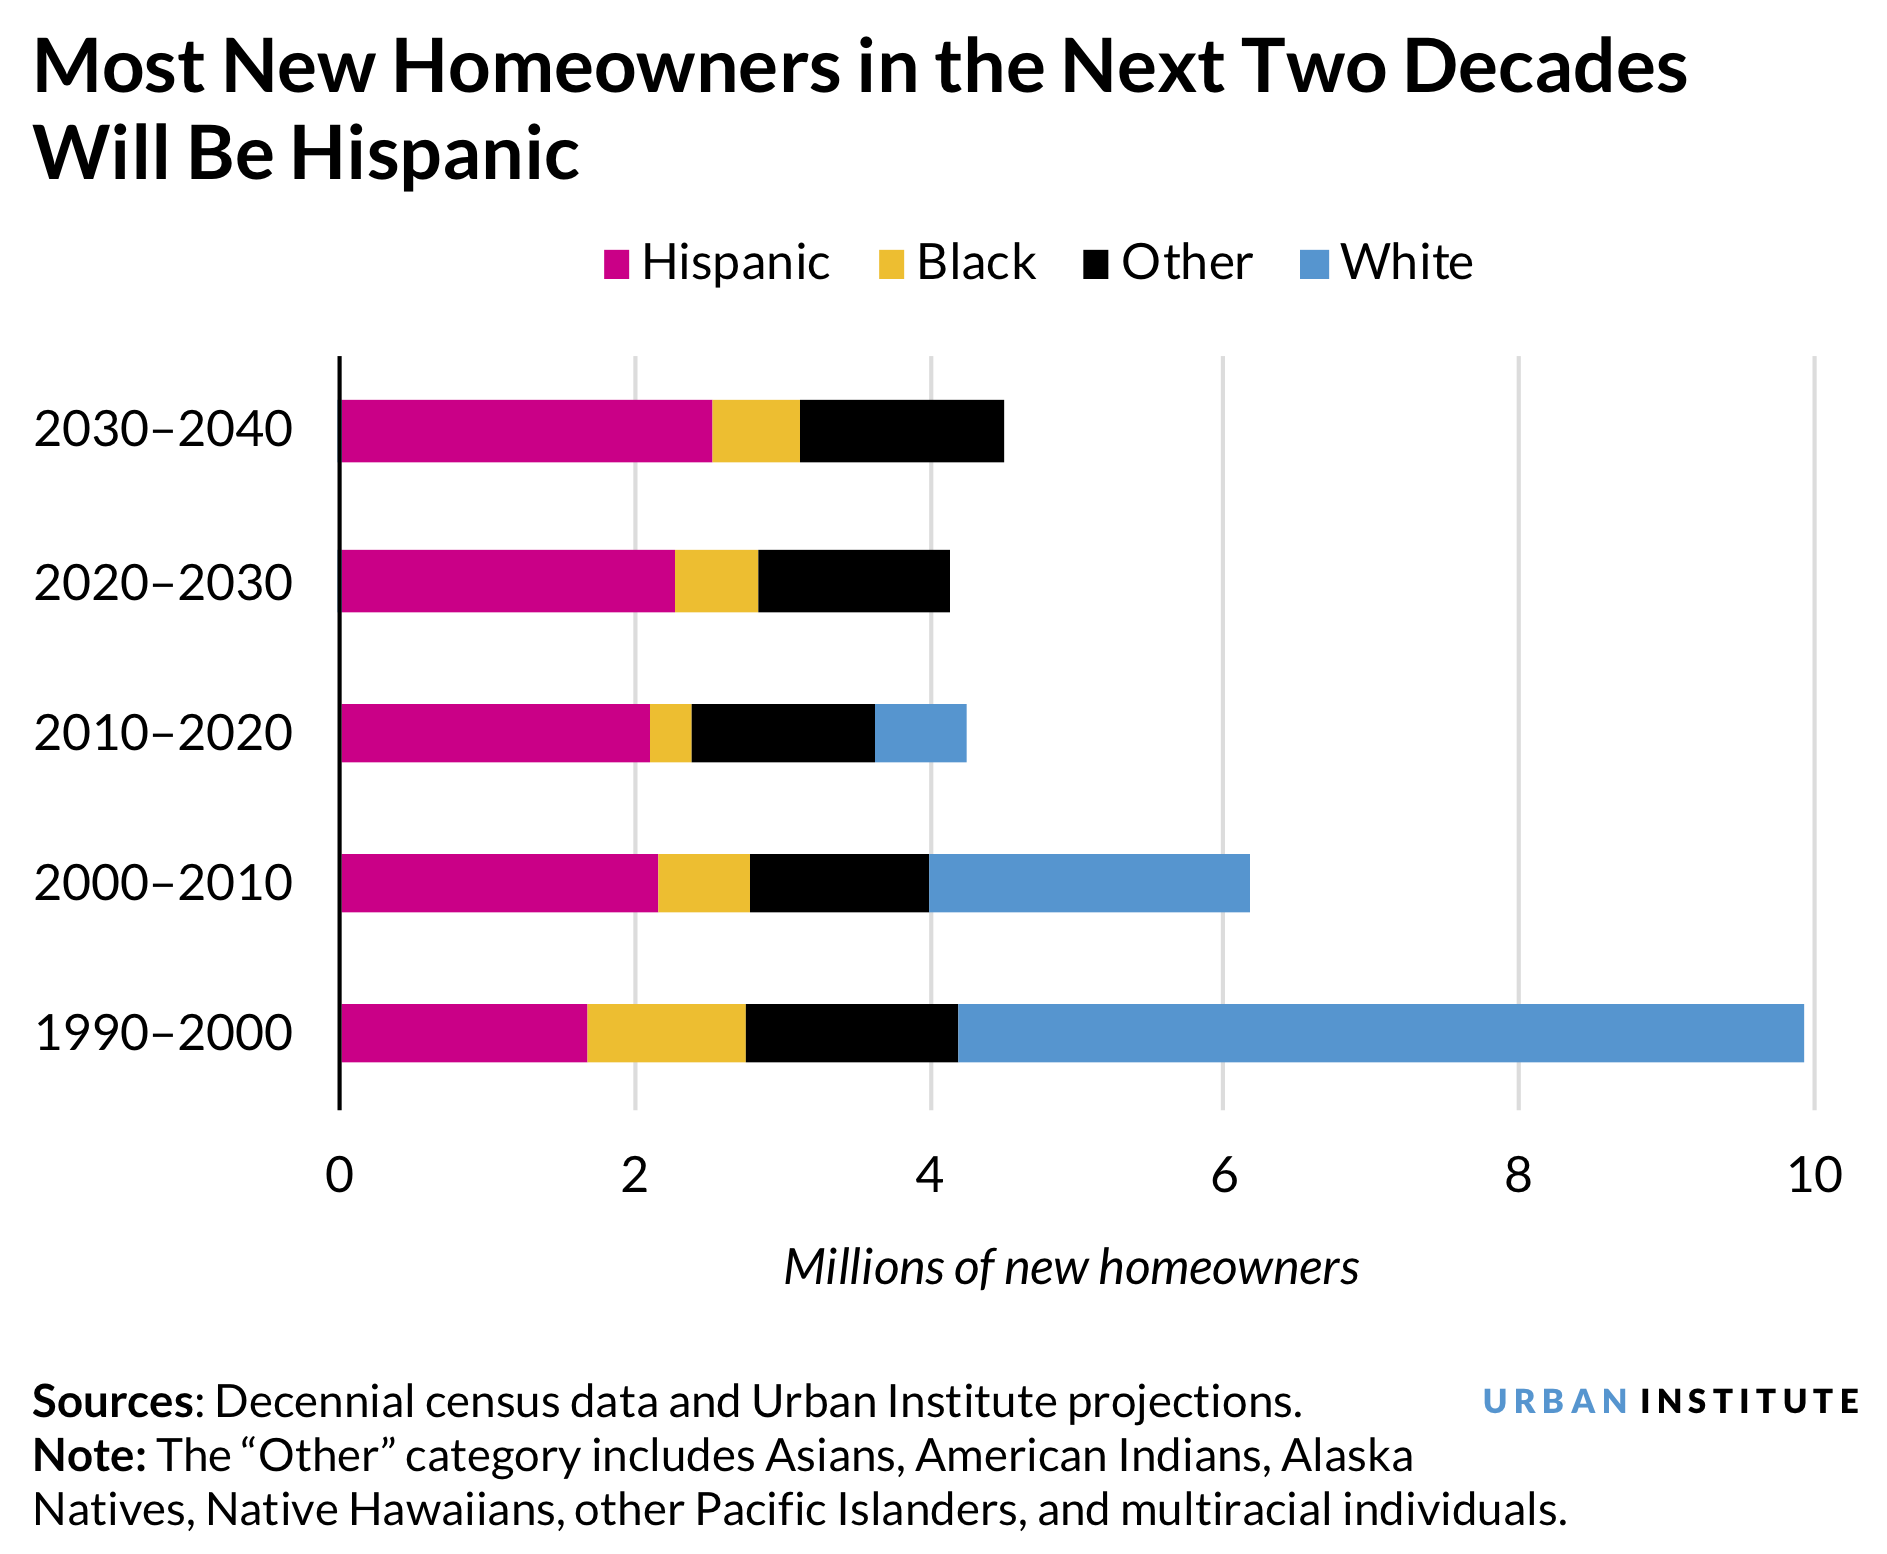 Bar chart showing most new Hispanic homeowners in the next two decades will be Hispanic